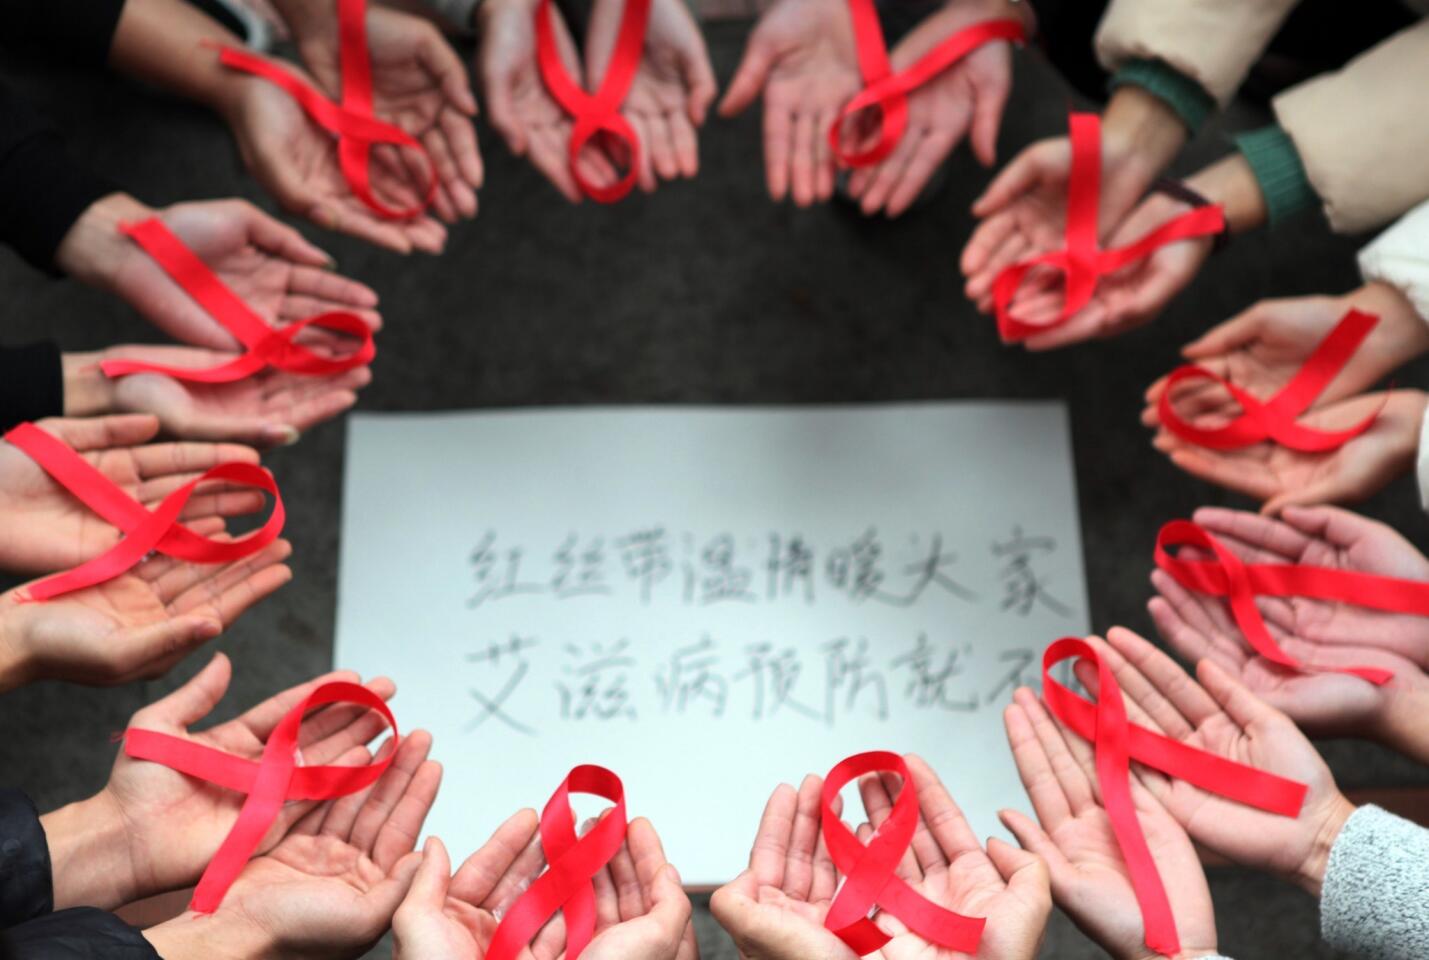 This picture taken on November 30, 2015 shows volunteers holding red ribbons above a piece of paper written in Chinese that reads ''Red ribbons bring warmth to everyone to prevent AIDS" during an event for World Aids Day in Chongqing.